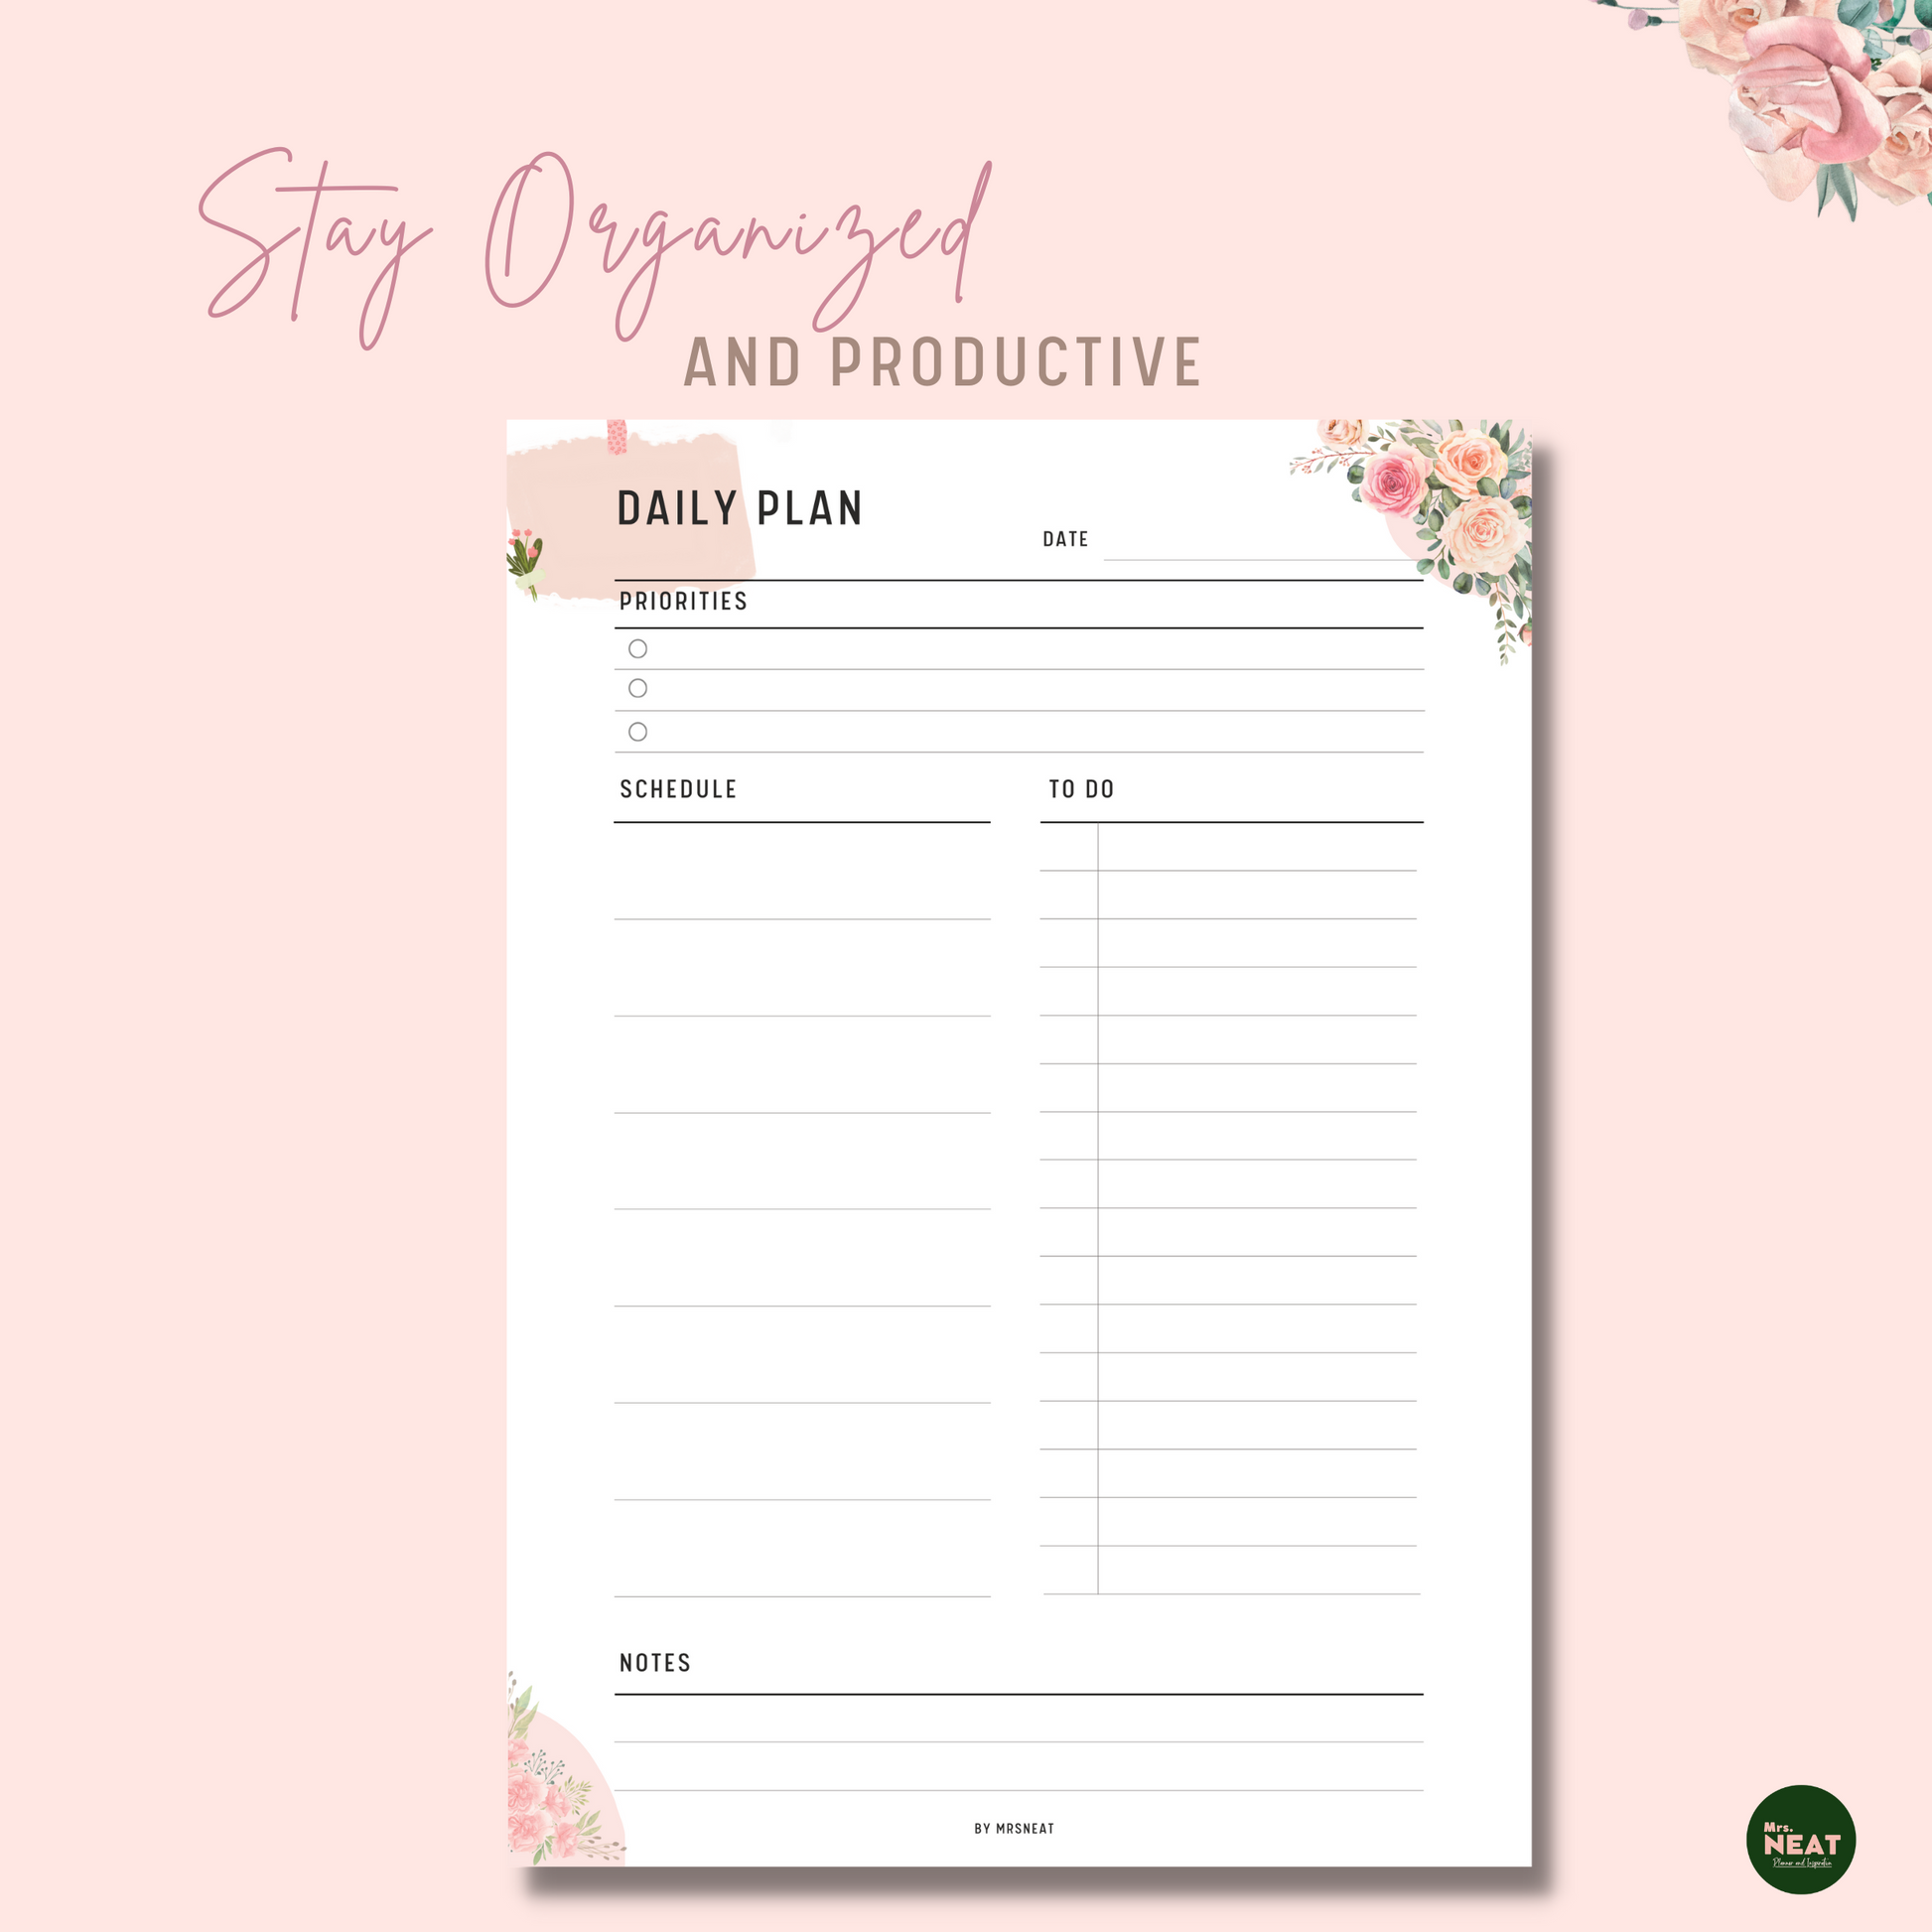 Floral Minimalist Daily Planner Printable with room for Priorities, Schedule, To Do List and Notes